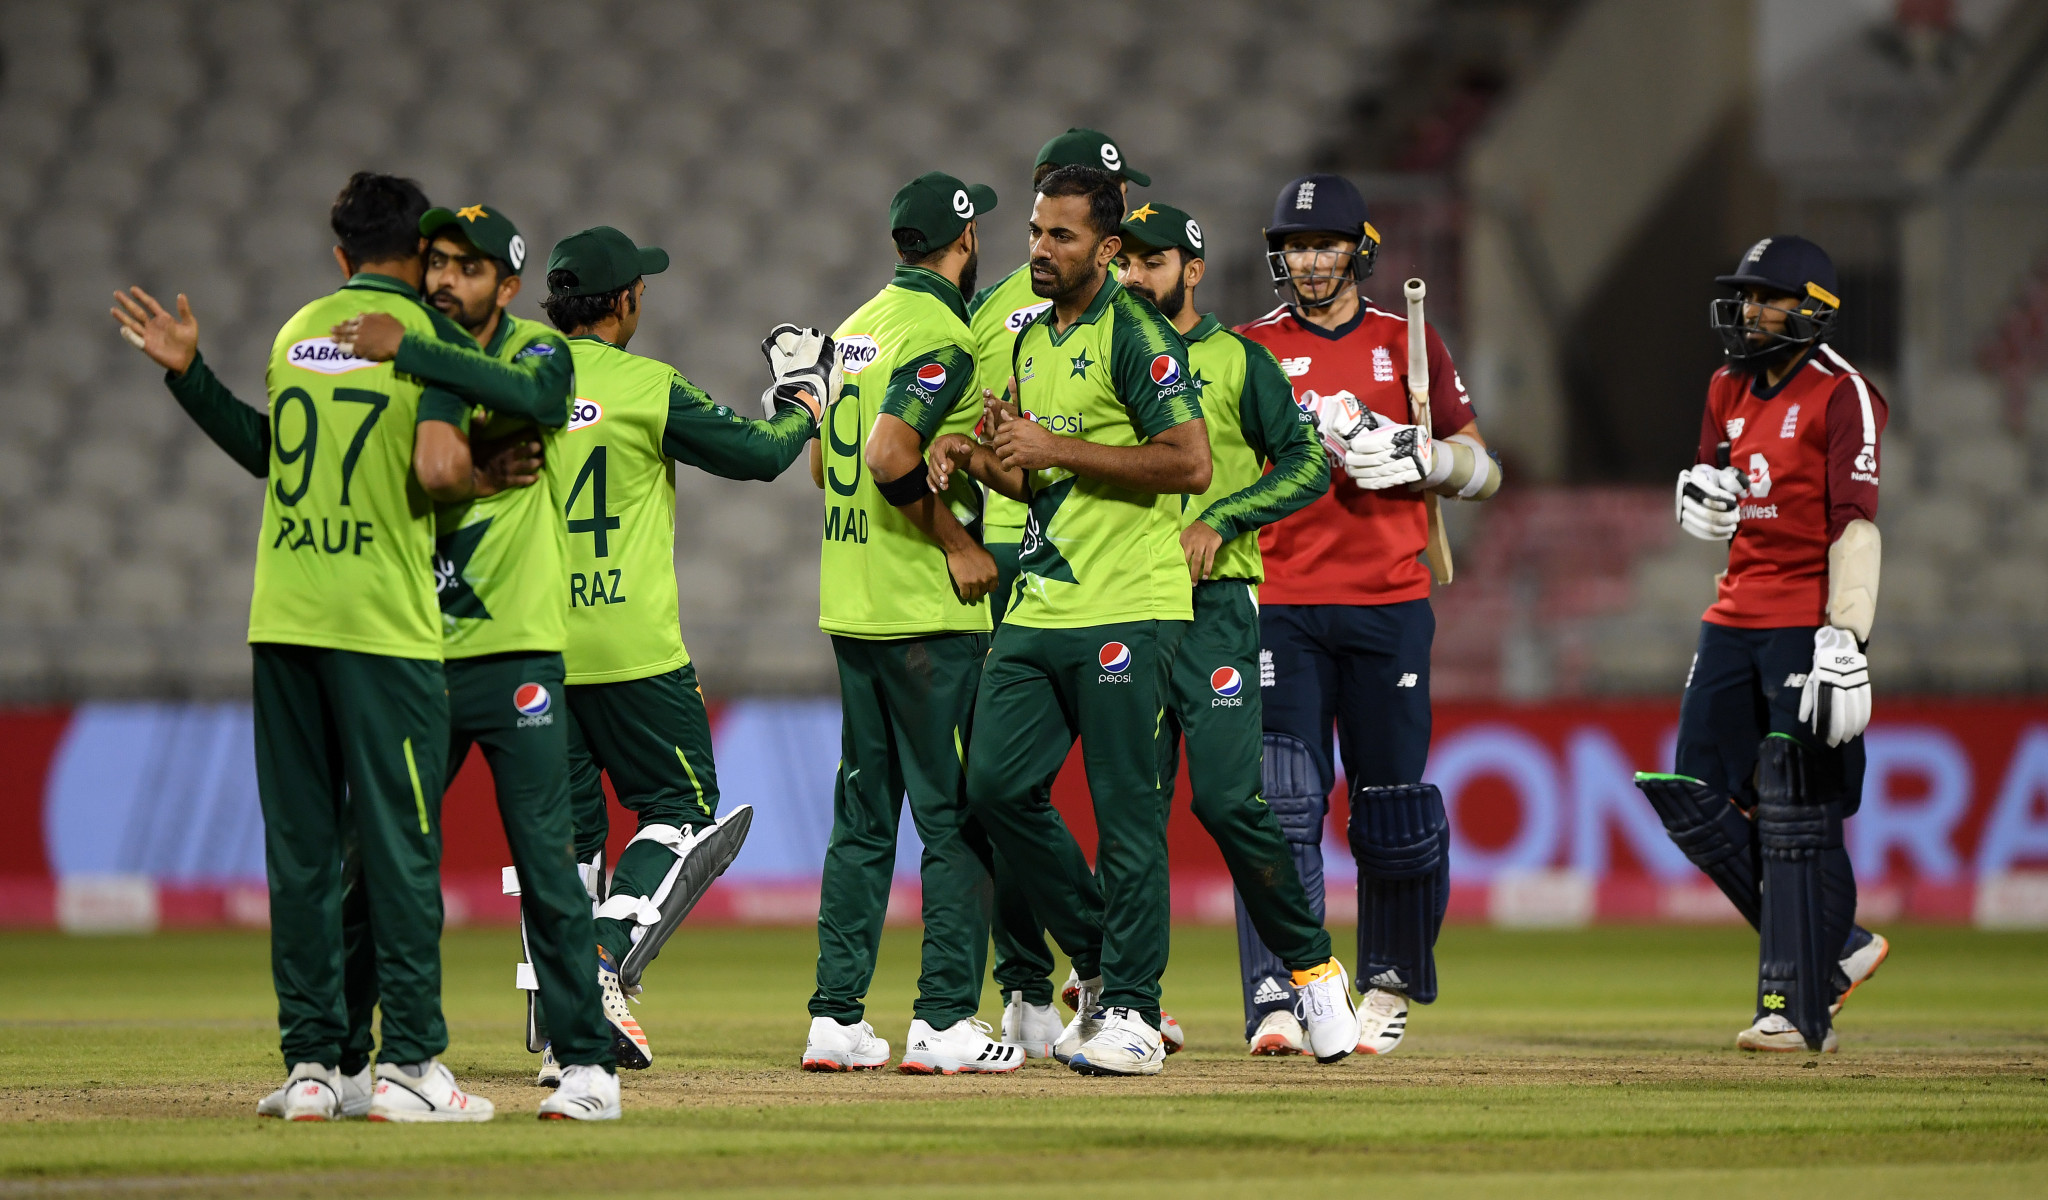 Pakistan's players are set to receive visas for next year's T20 World Cup in India ©Getty Images